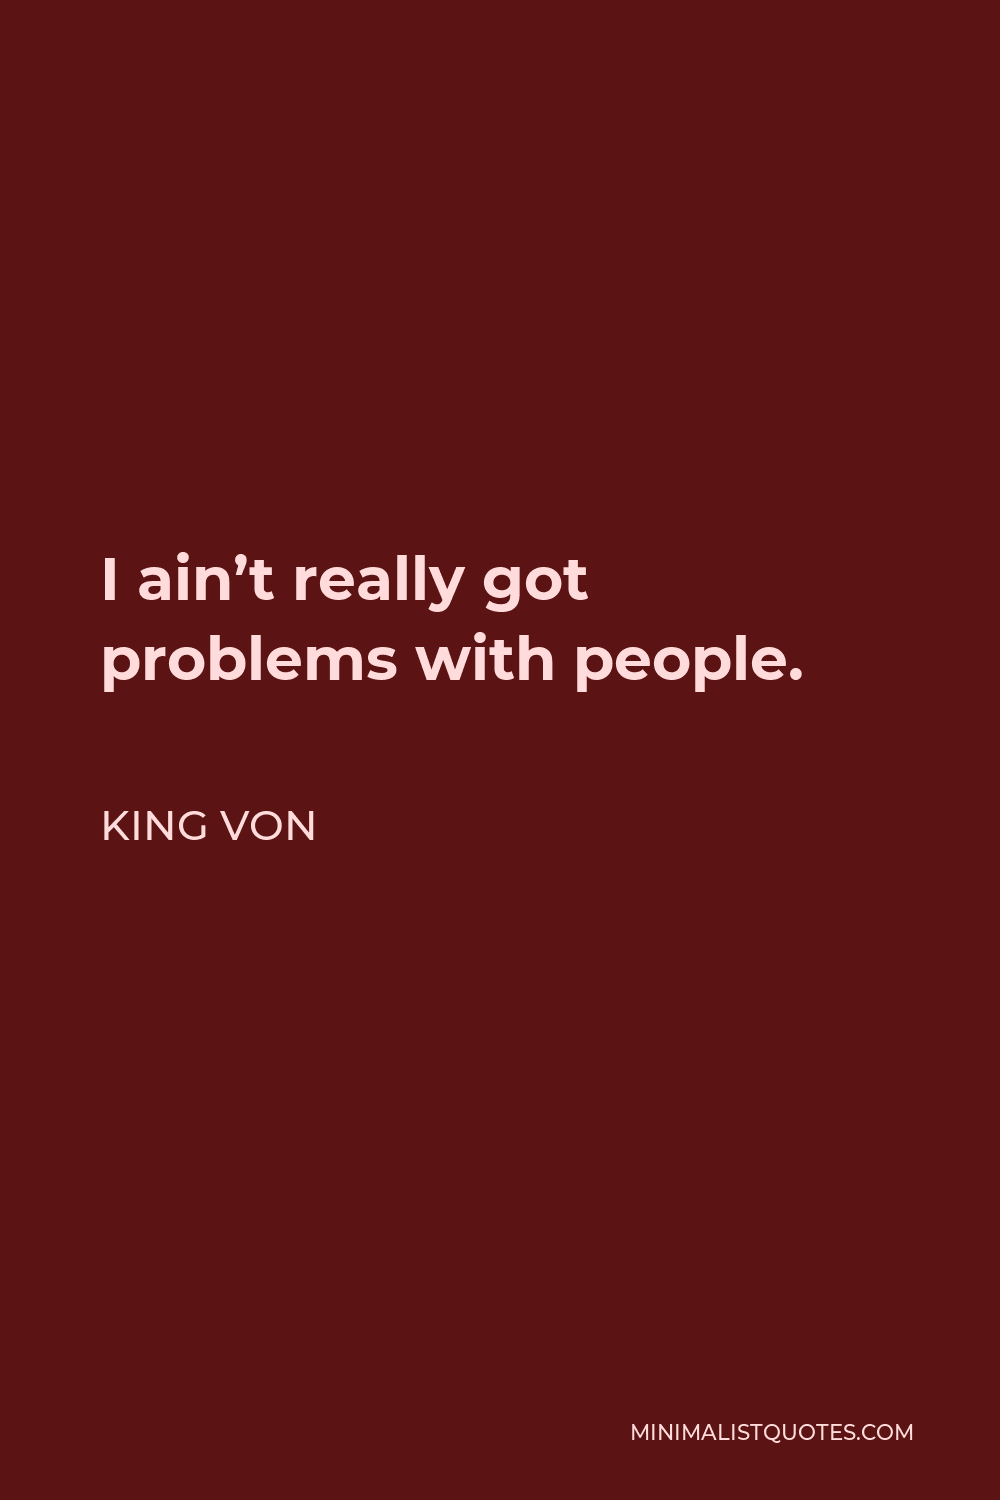 King Von Quote - I ain’t really got problems with people.